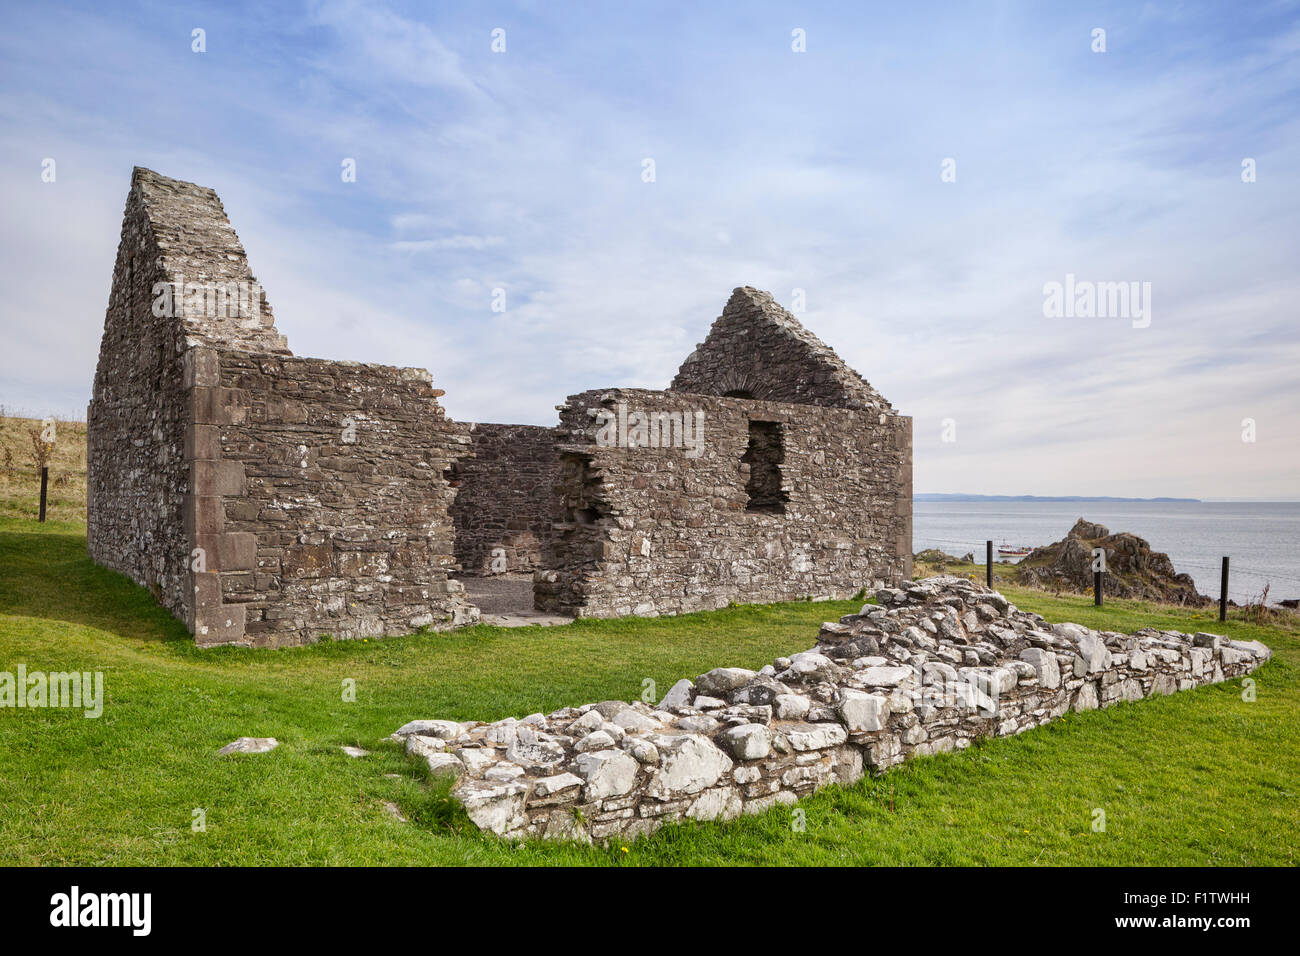 St Ninian's Chapel at the Isle of Whithorn, Wigtownshire, Scotland, and part of its surrounding wall. The chapel dates from... Stock Photo